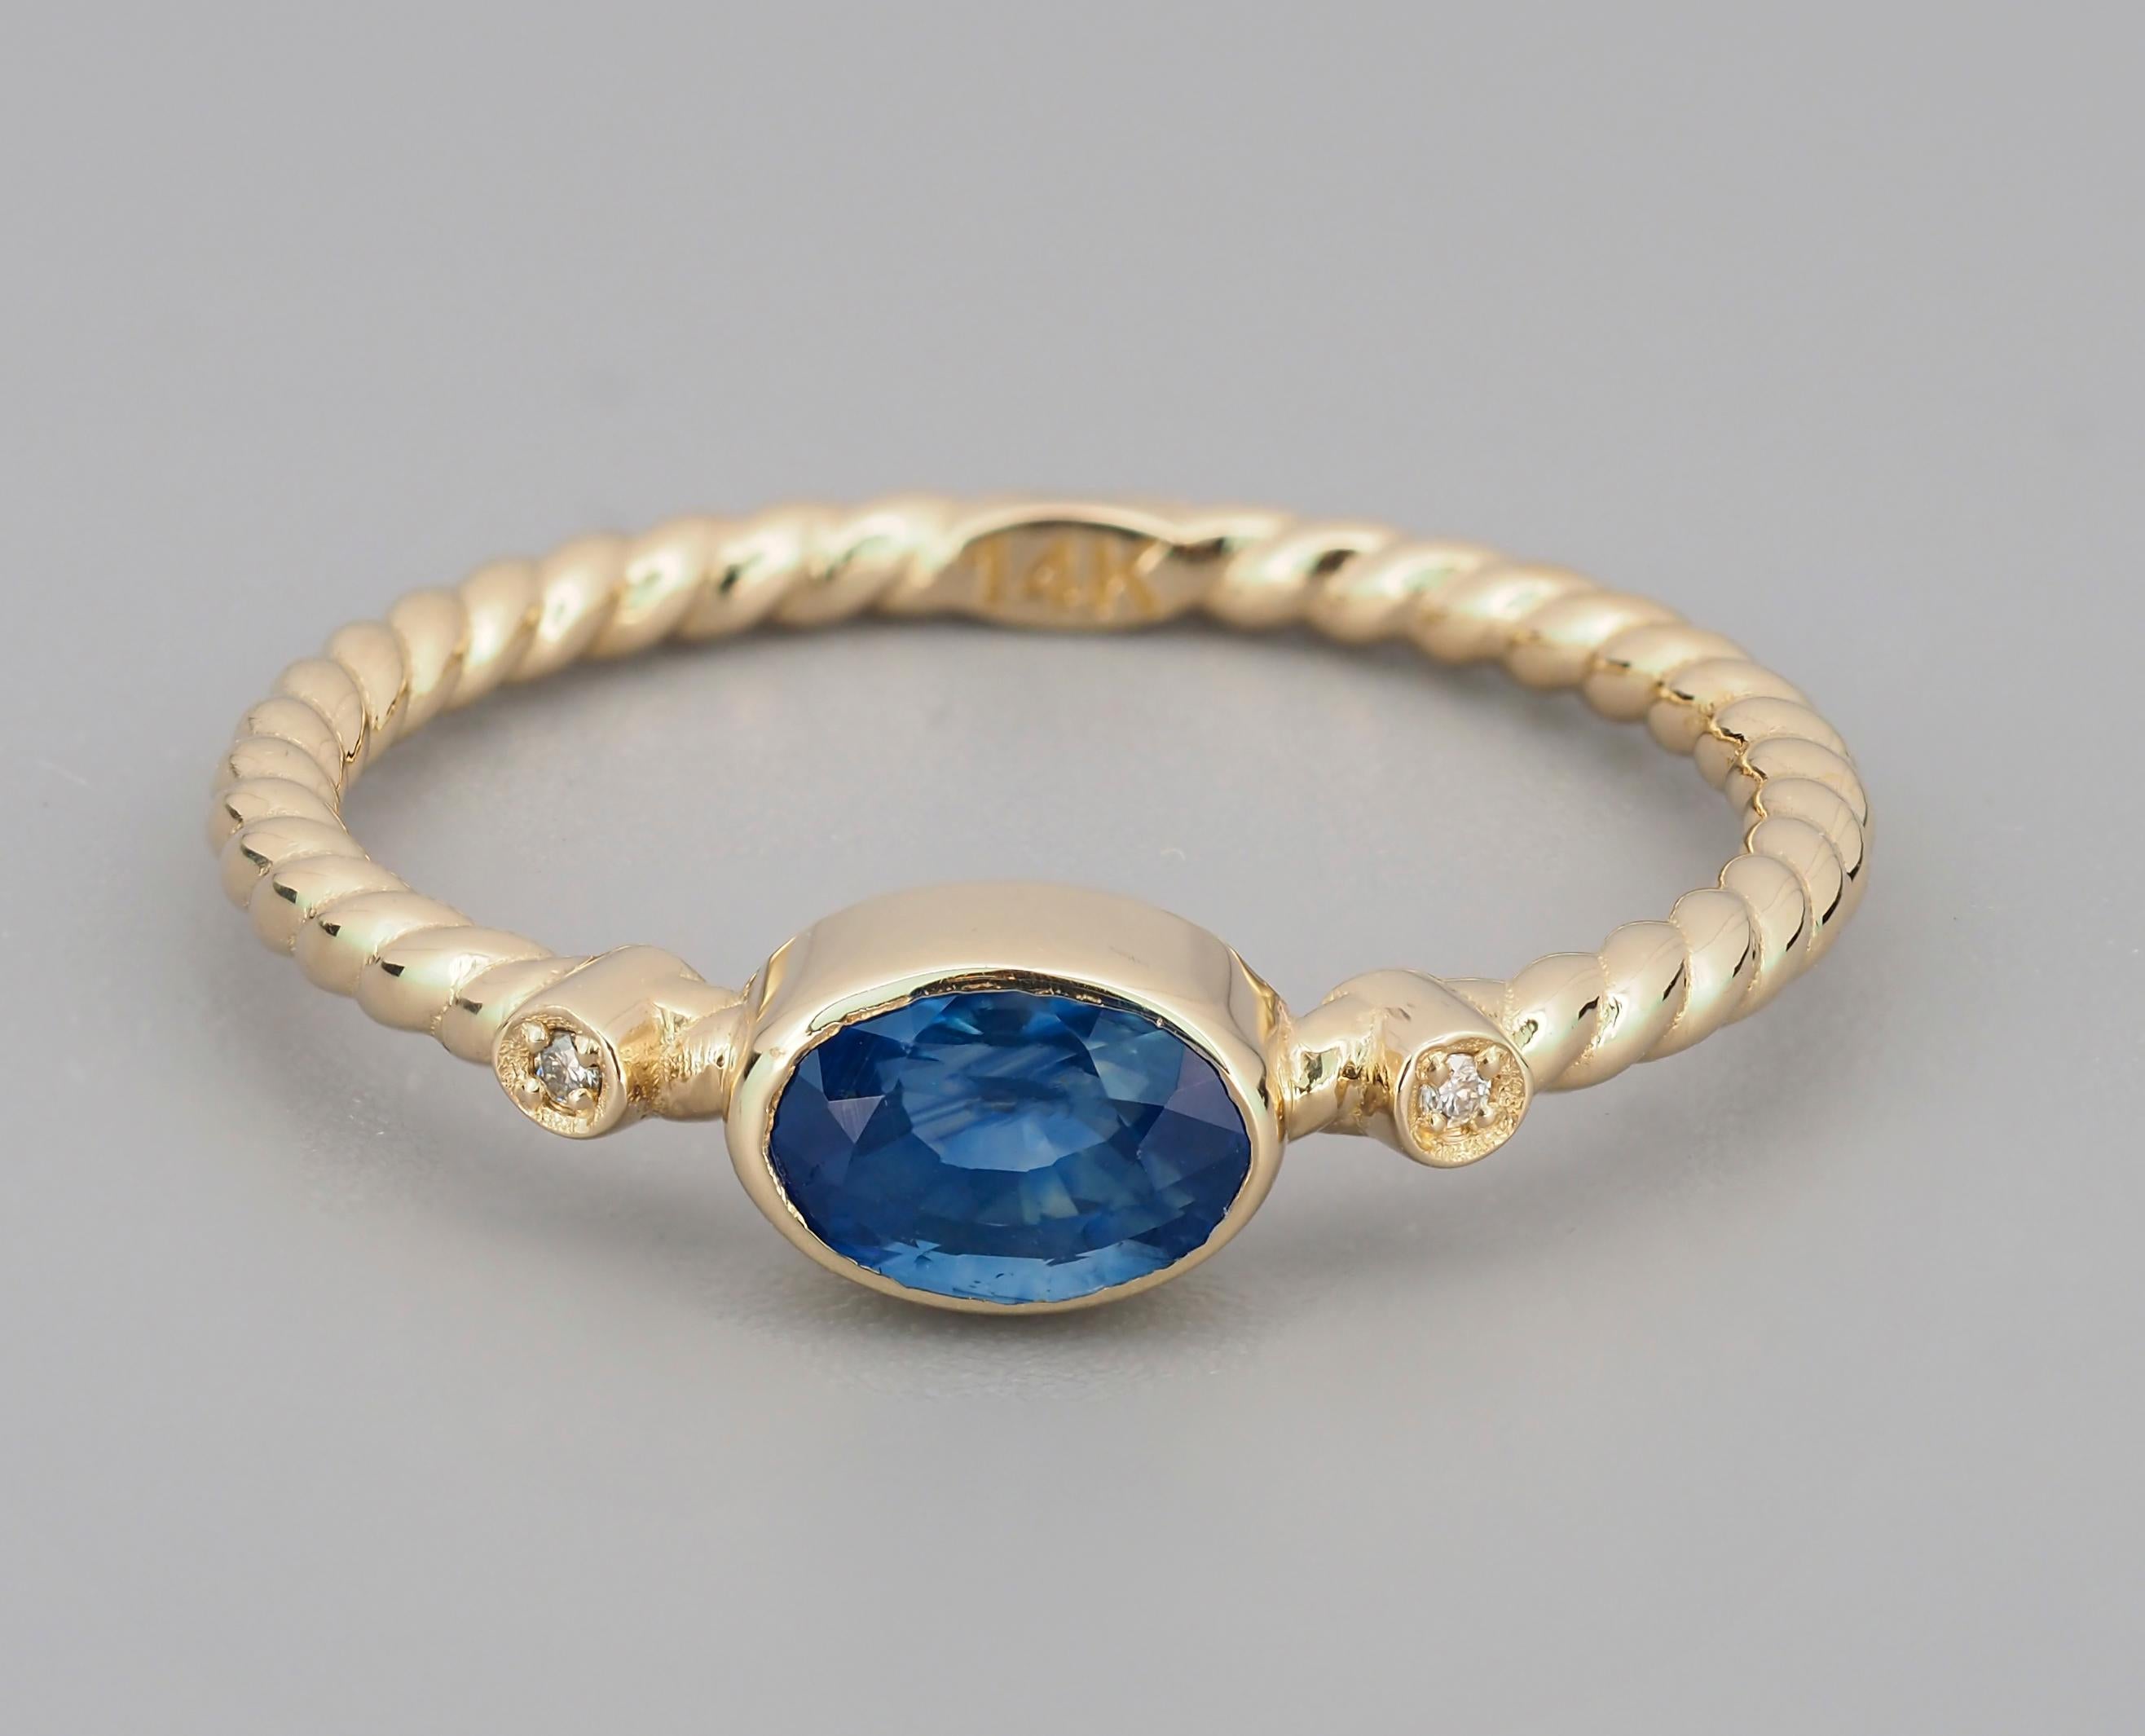 For Sale:  Blue sapphire ring in 14k gold.  2